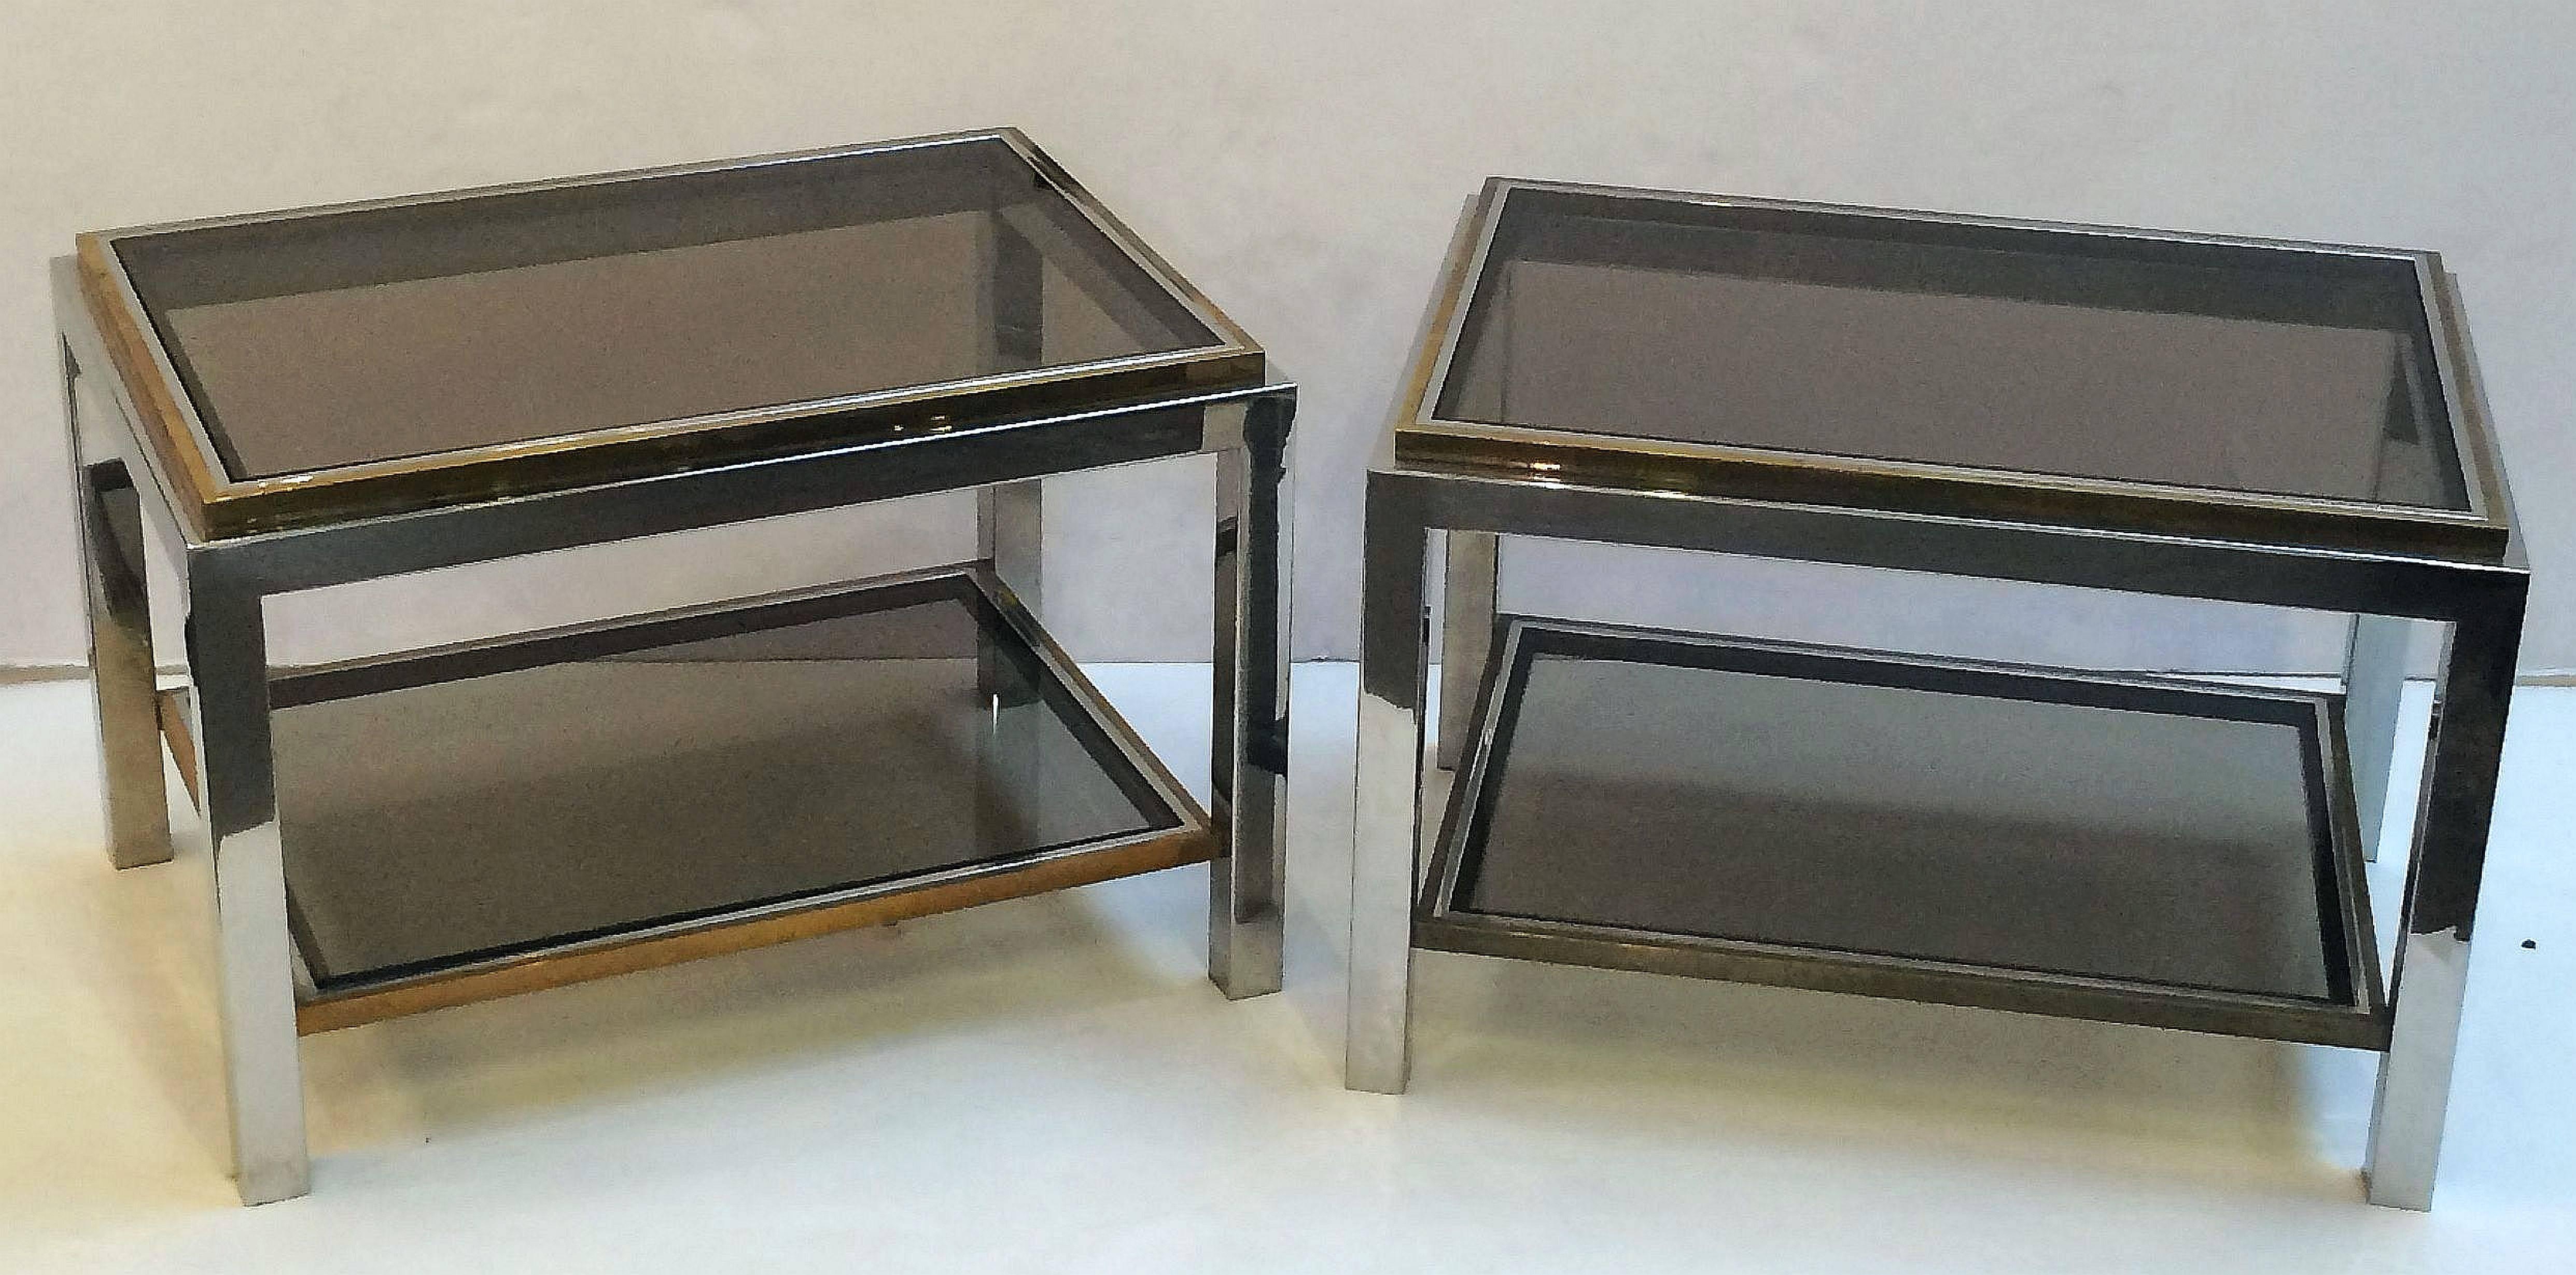 A handsome pair of cocktail or low tables by the celebrated designer, Willy Rizzo.
Featuring a stylish modern design of smoked glass and chromed brass.

Pair of low table dimensions:

Each table H 19